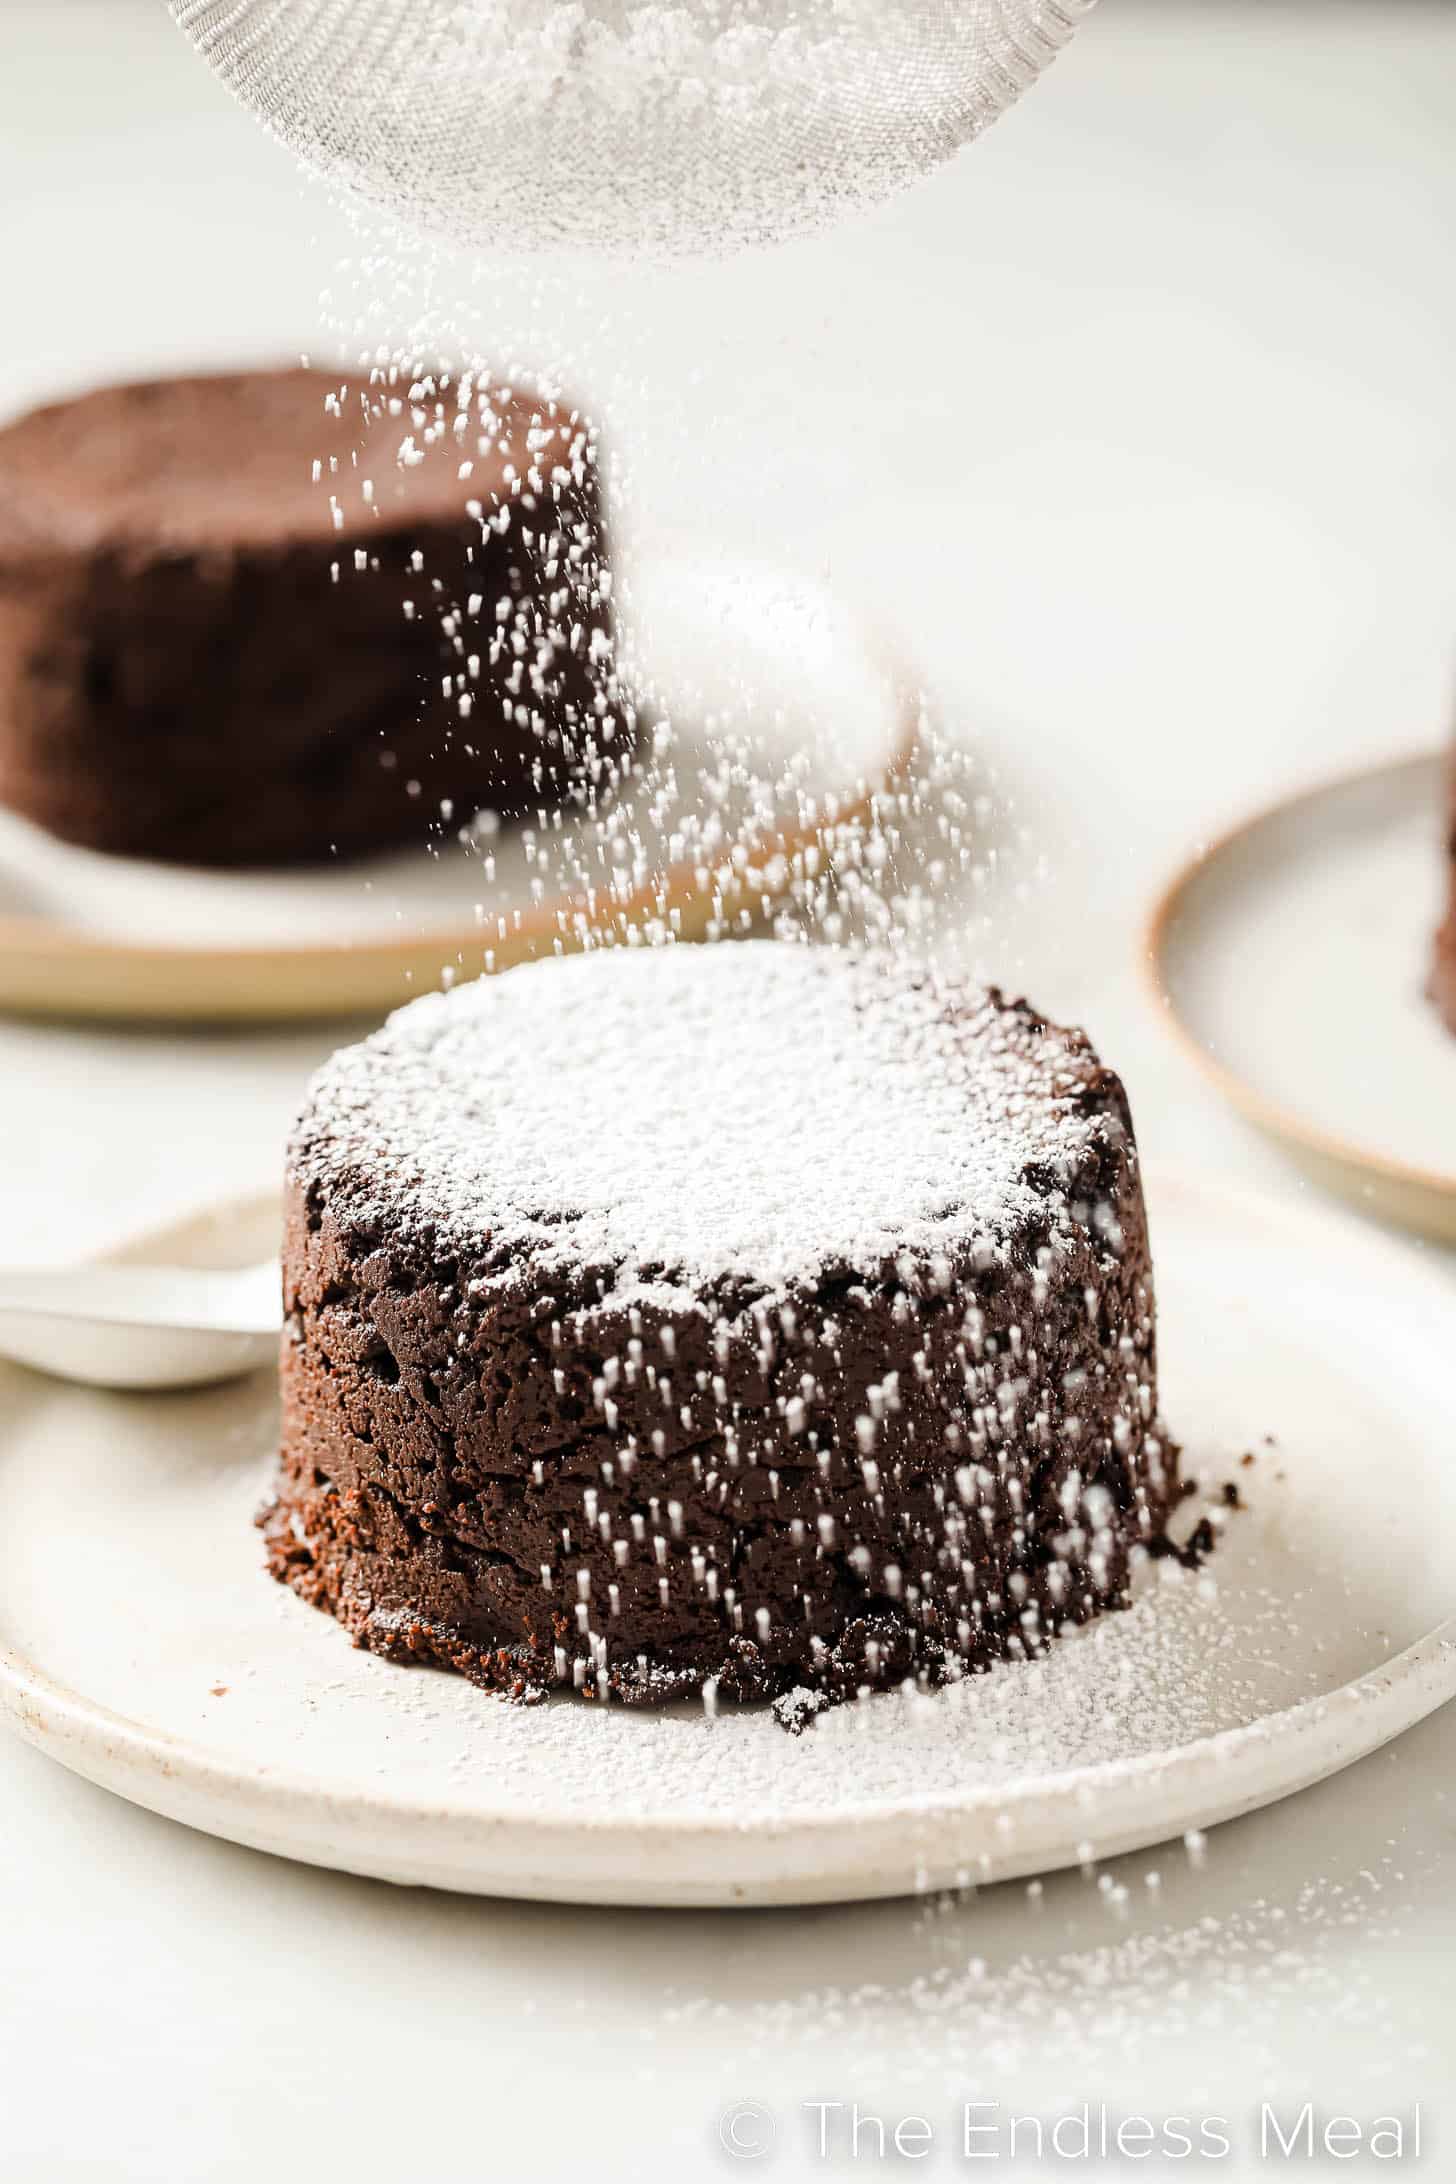 icing sugar dusted over a chocolate lava cake